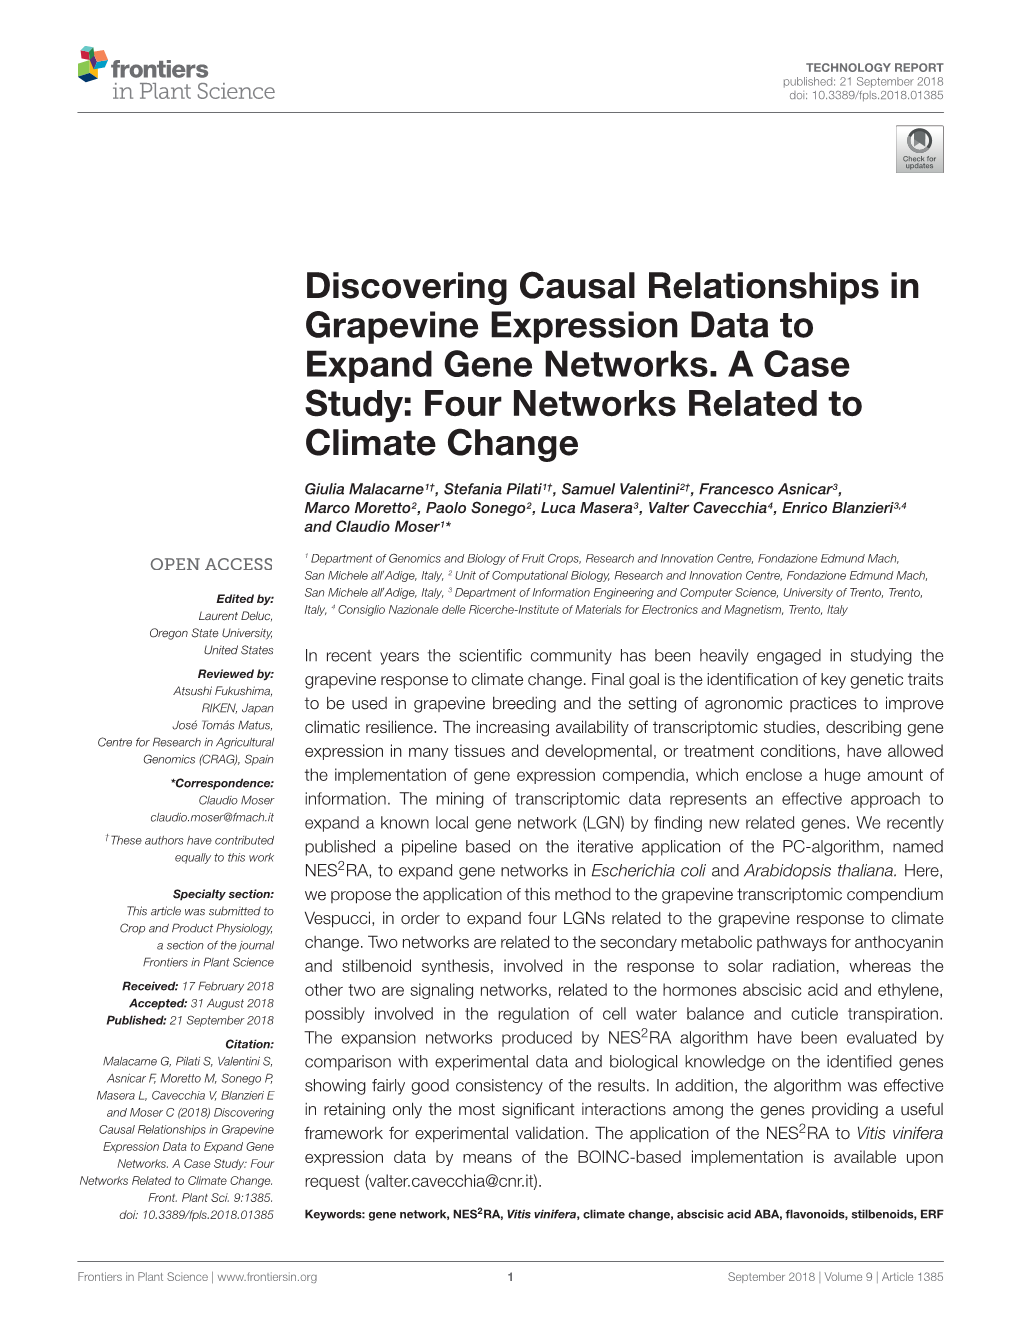 Discovering Causal Relationships in Grapevine Expression Data to Expand Gene Networks